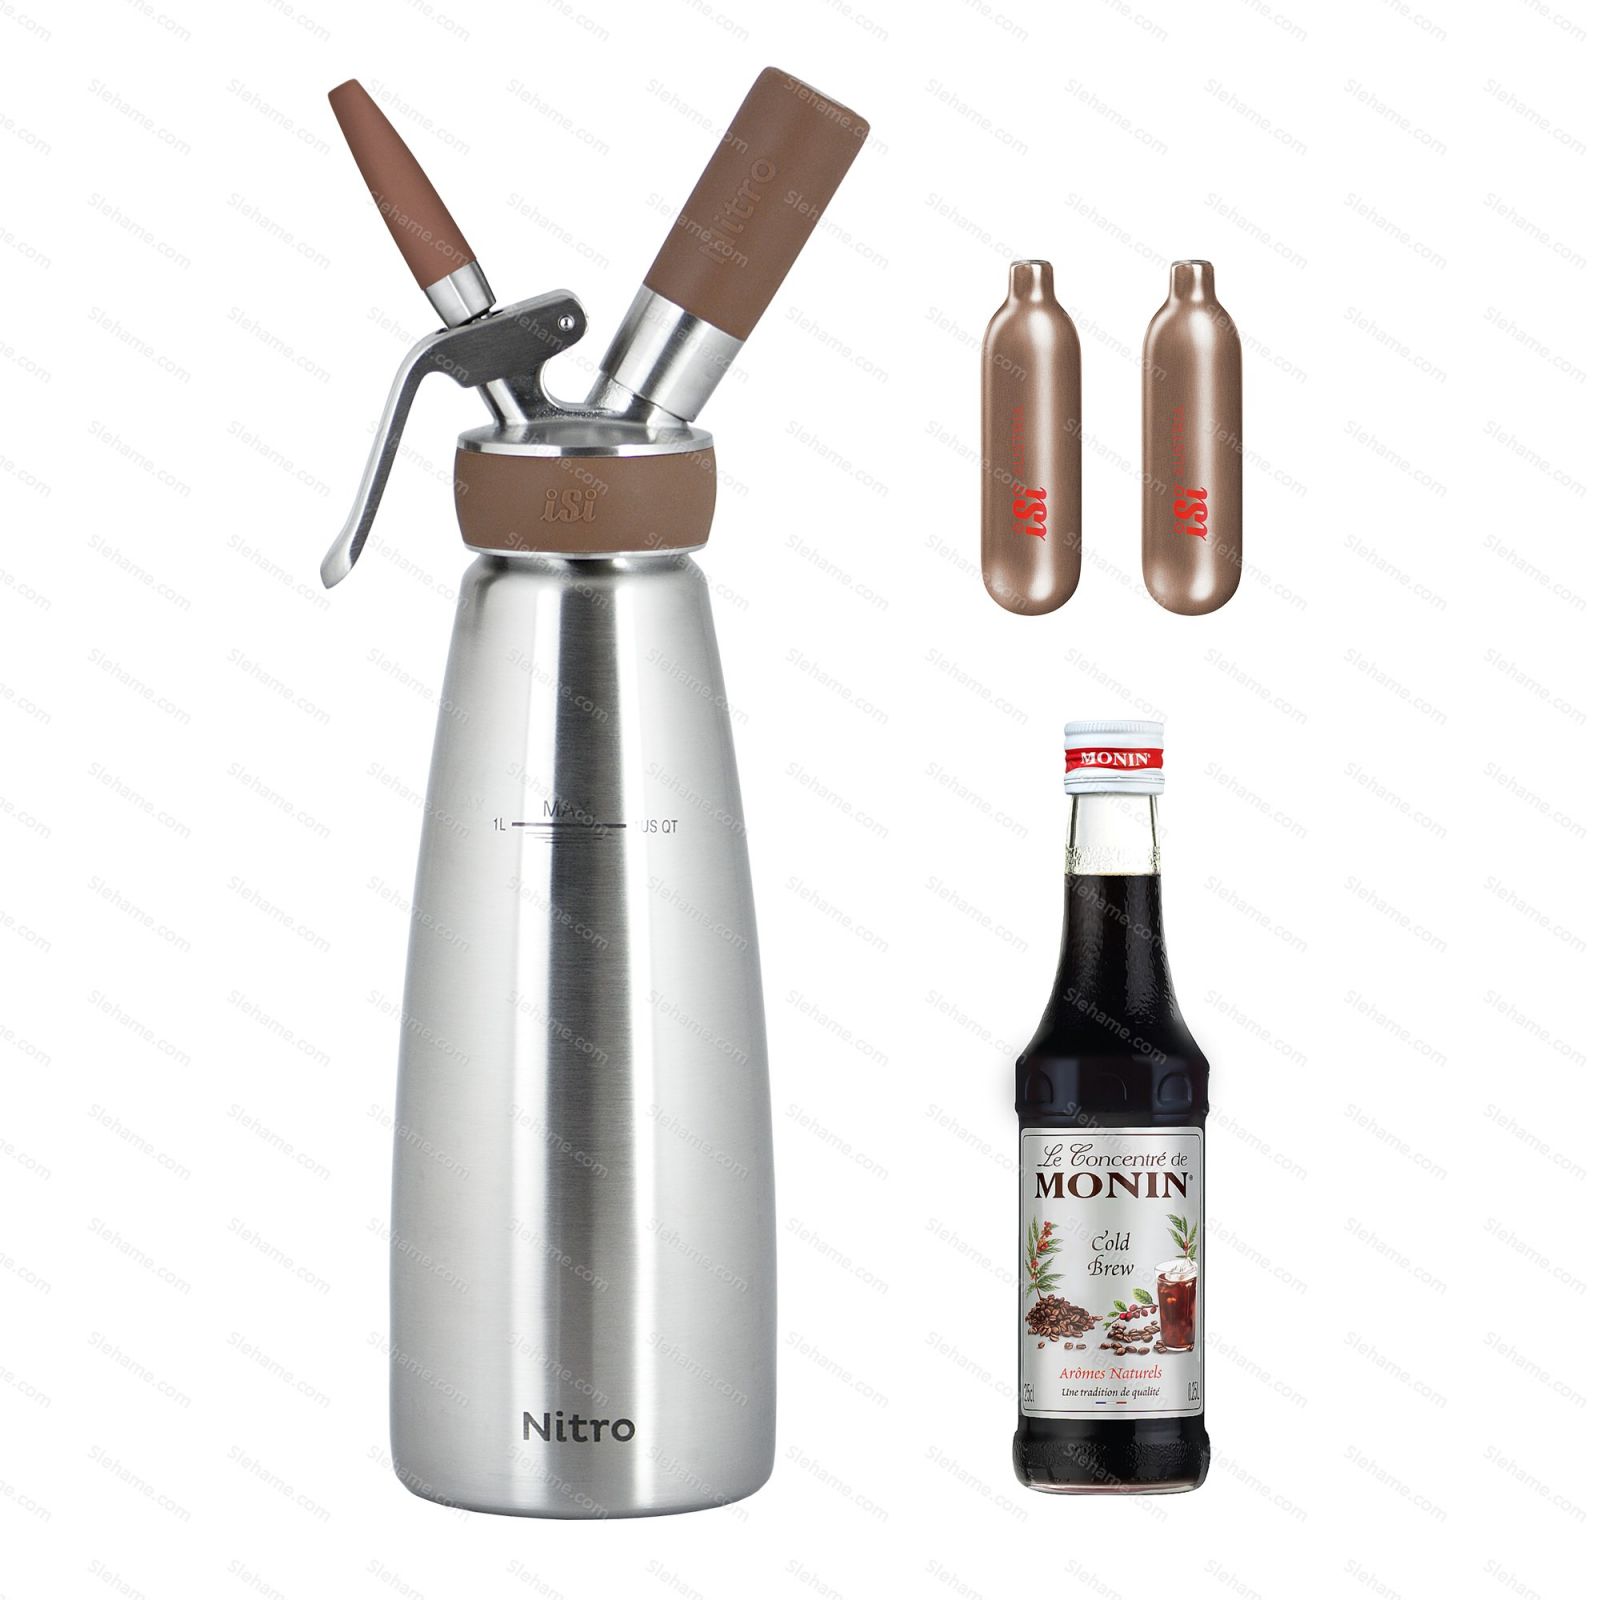 Nitro Cold Brew iSi BAR KIT - package content